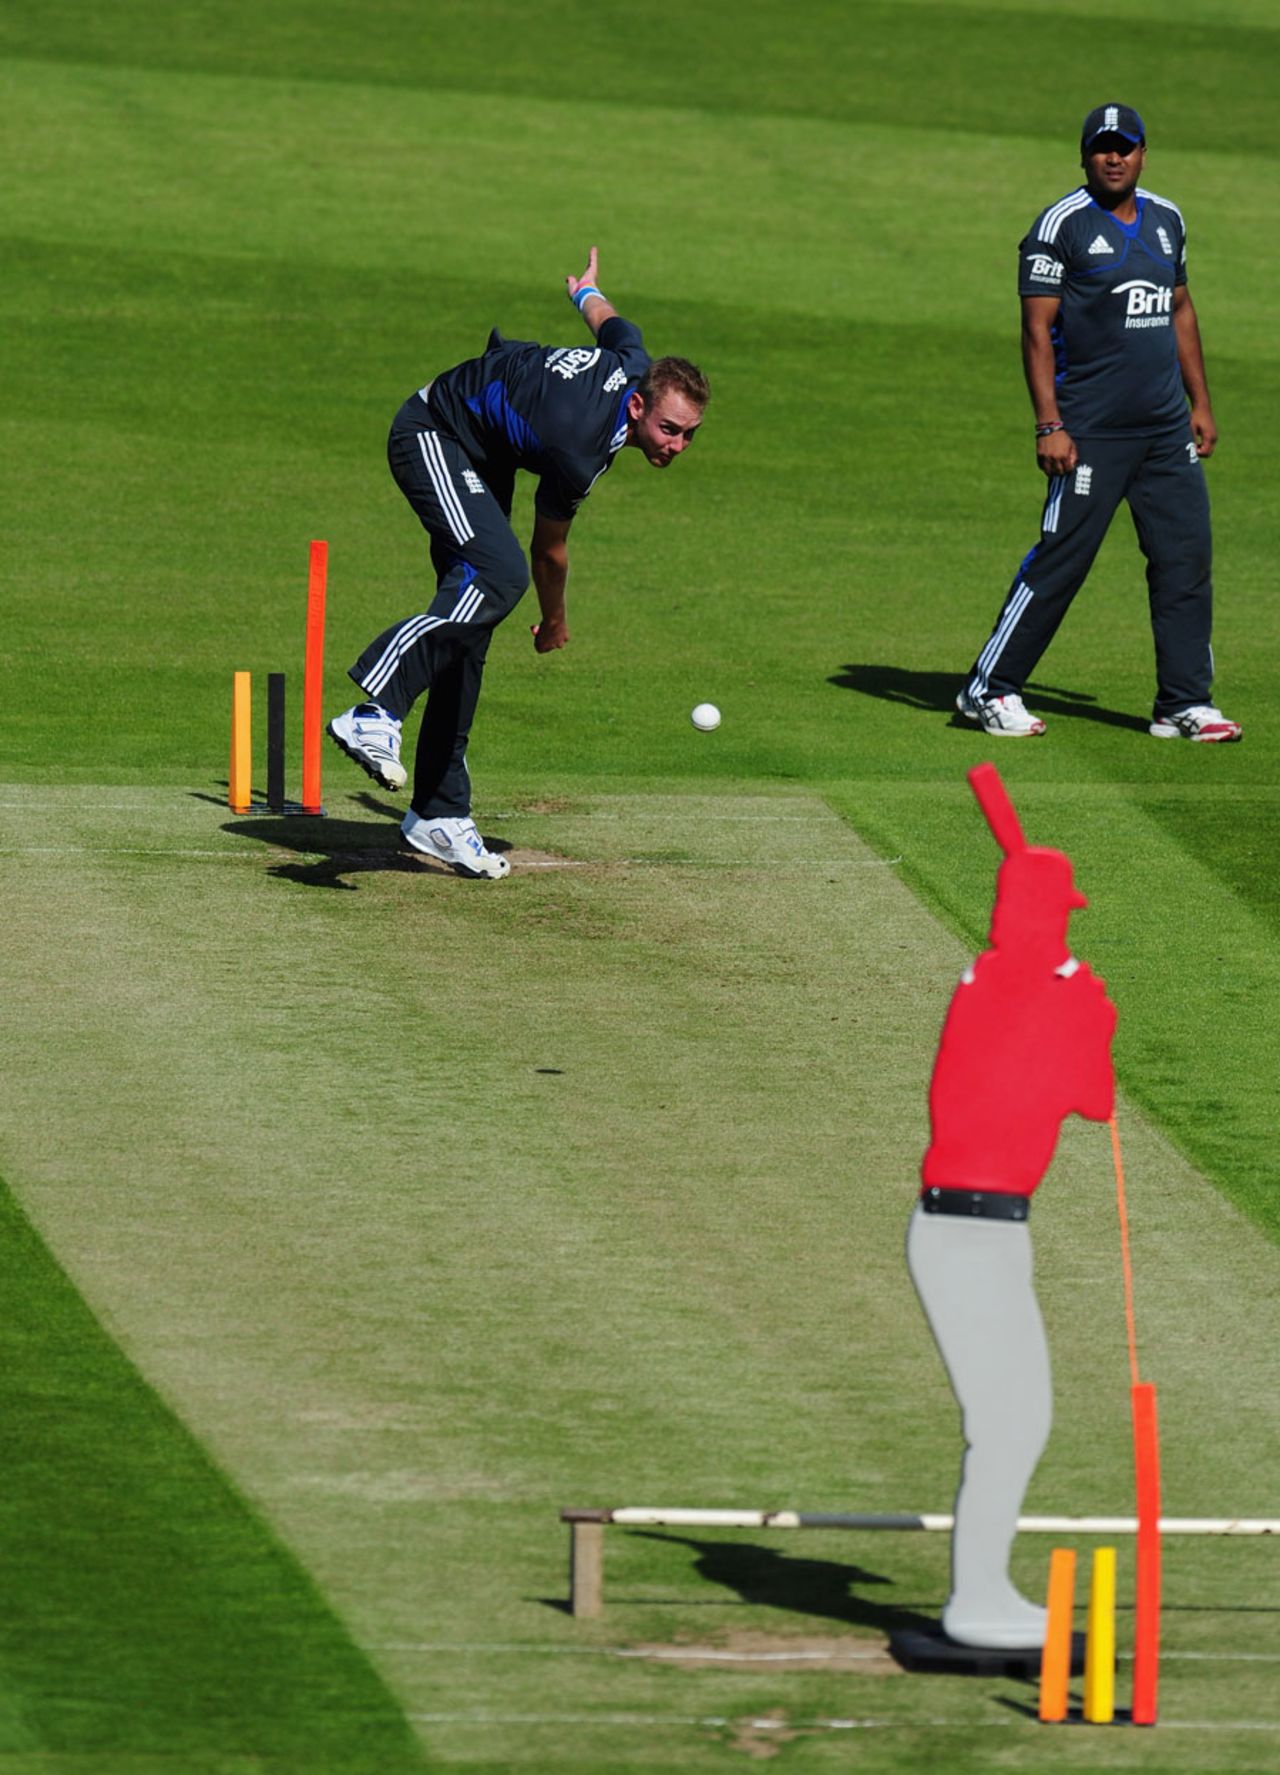 Stuart Broad bowls at a cut-out target as Samit Patel looks on, Chester-le-Street, September 7, 2012